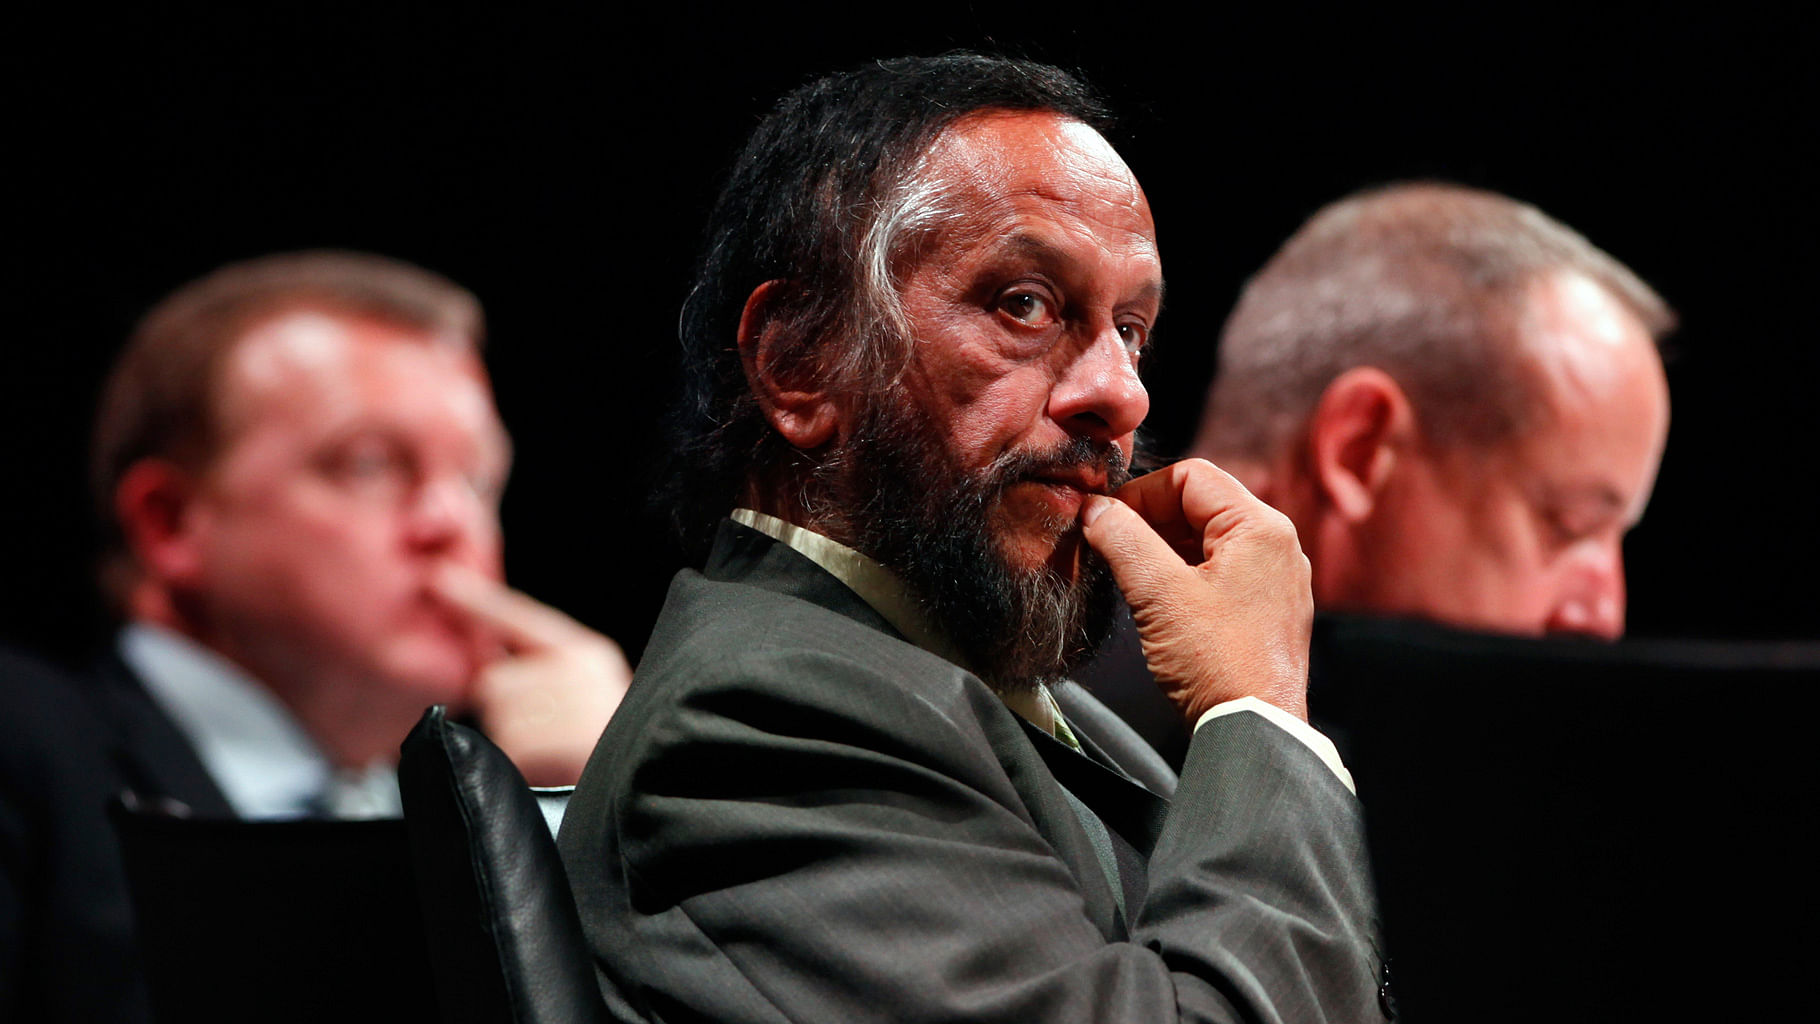 Pachauri had to step down from his position after he was accused of sexually harassing a former woman colleague.